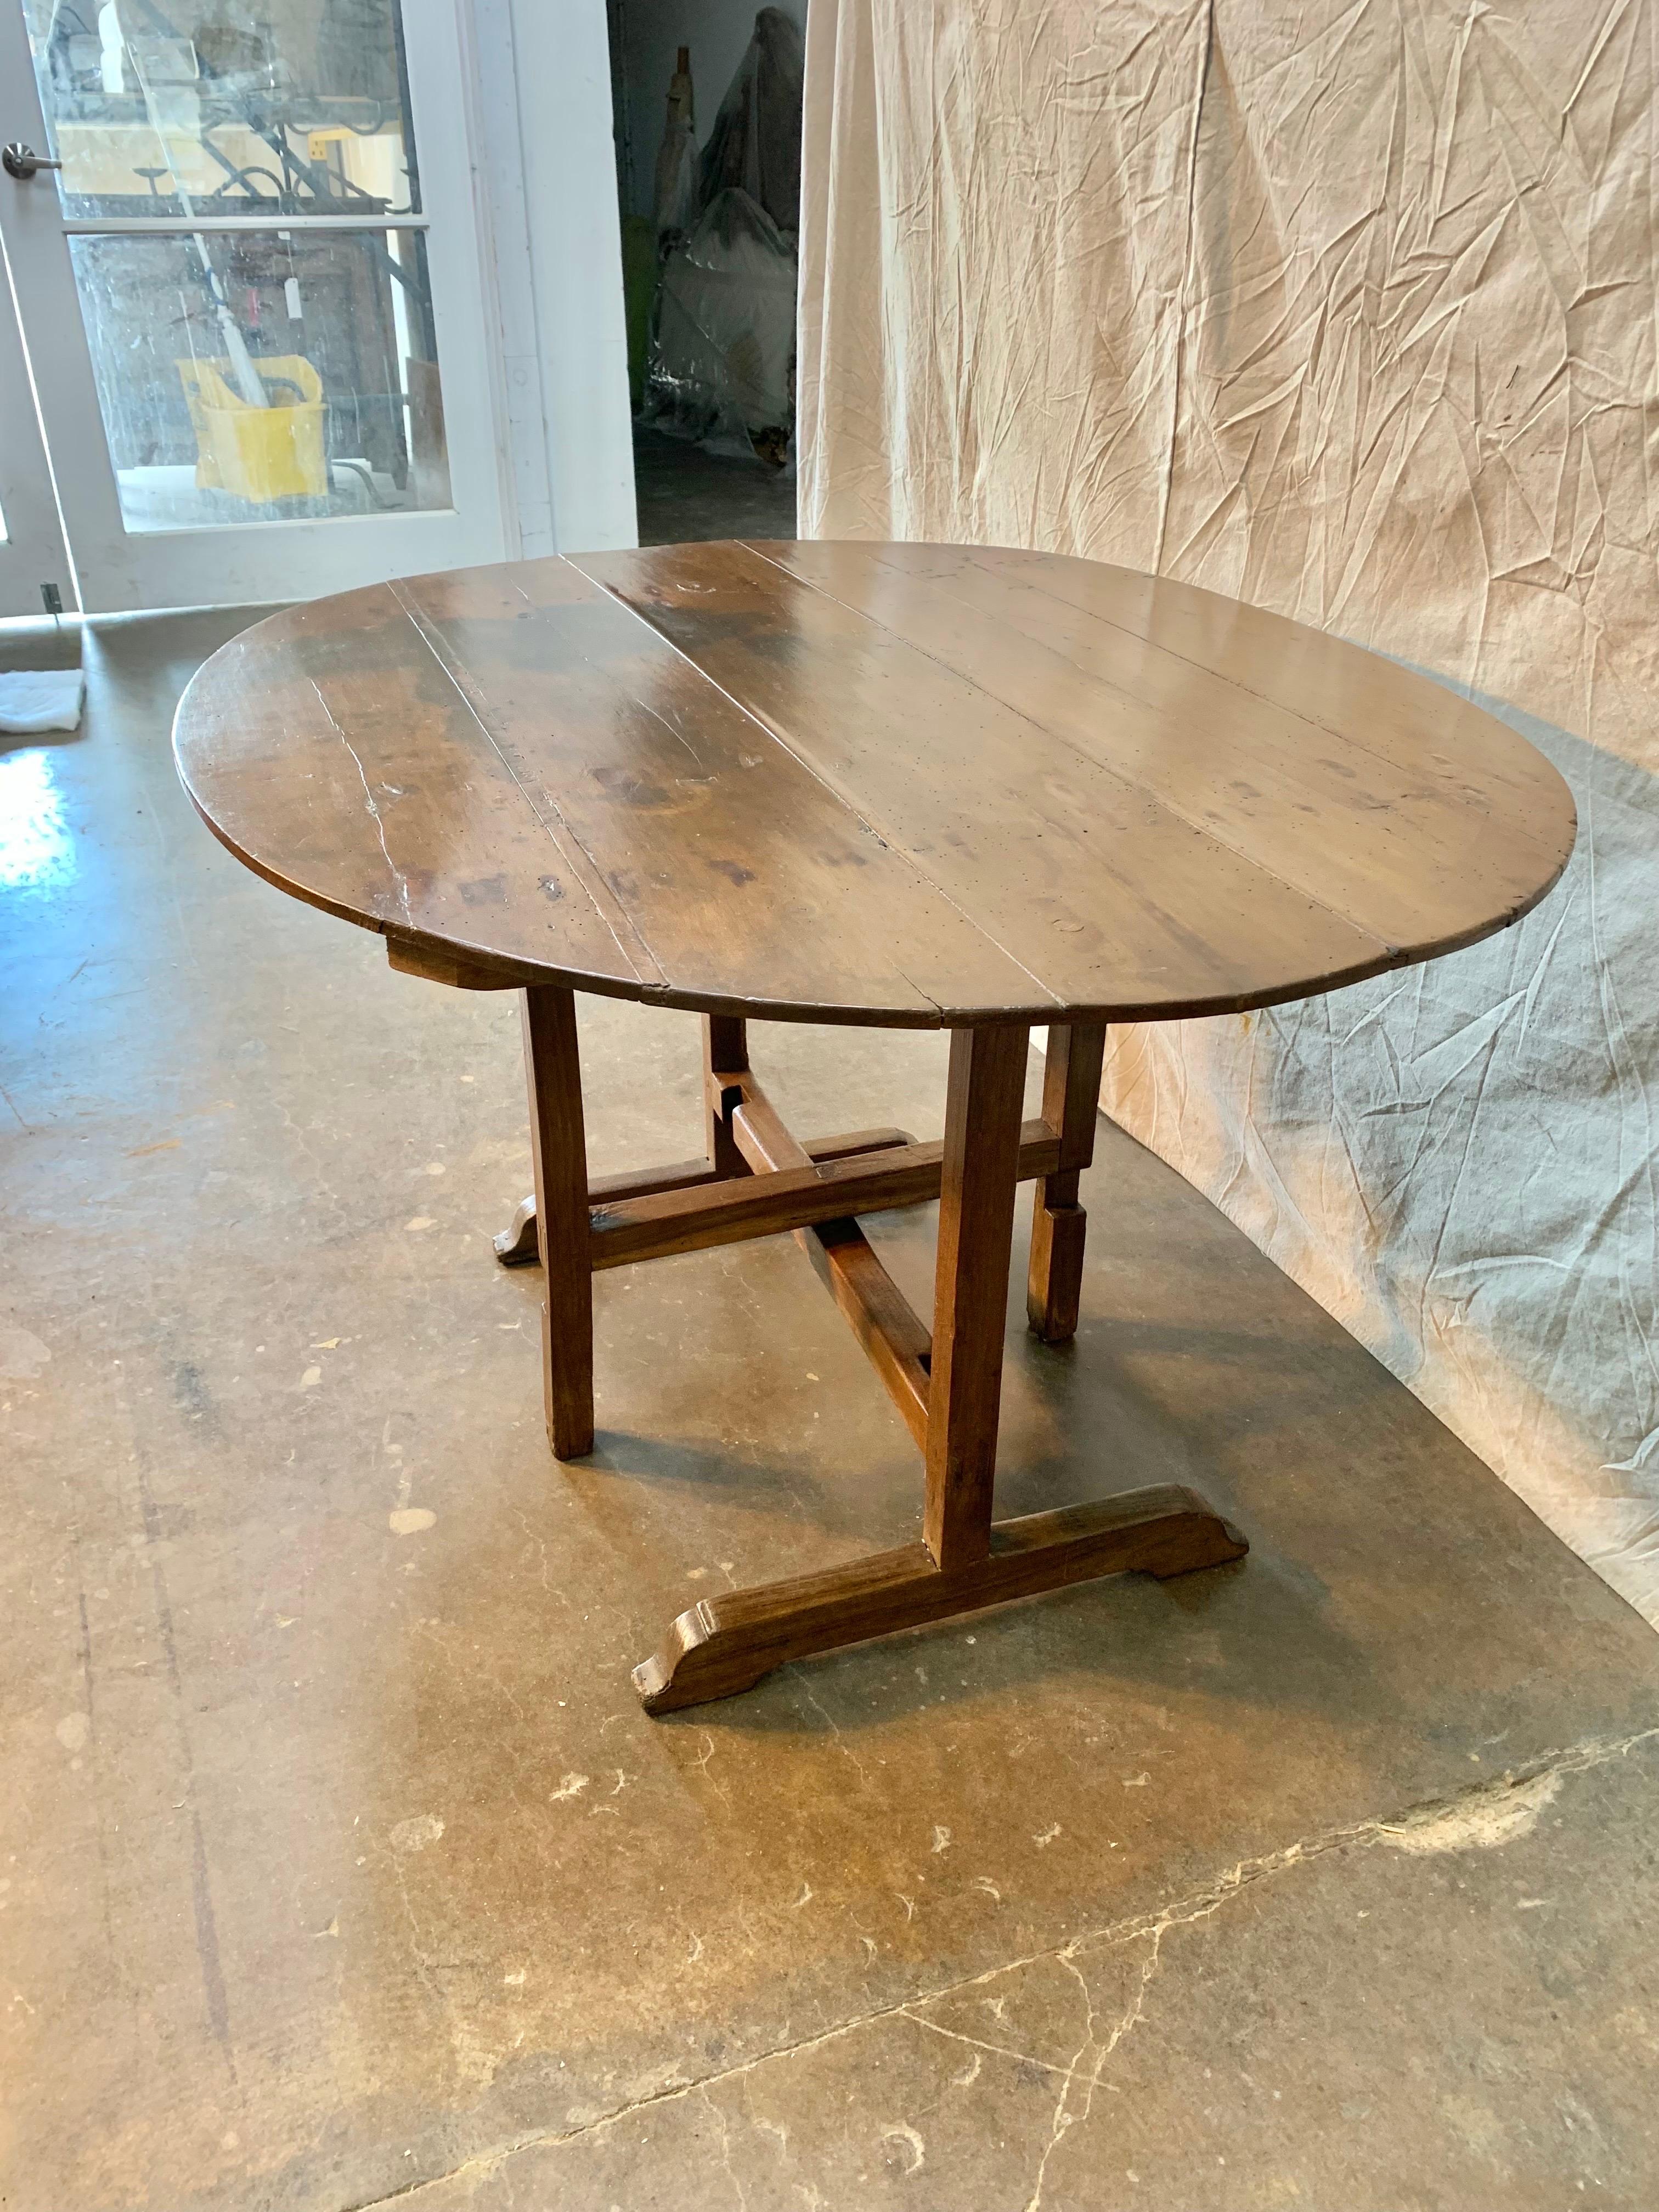 19th century French Walnut Wine Tasting Table In Good Condition For Sale In Burton, TX